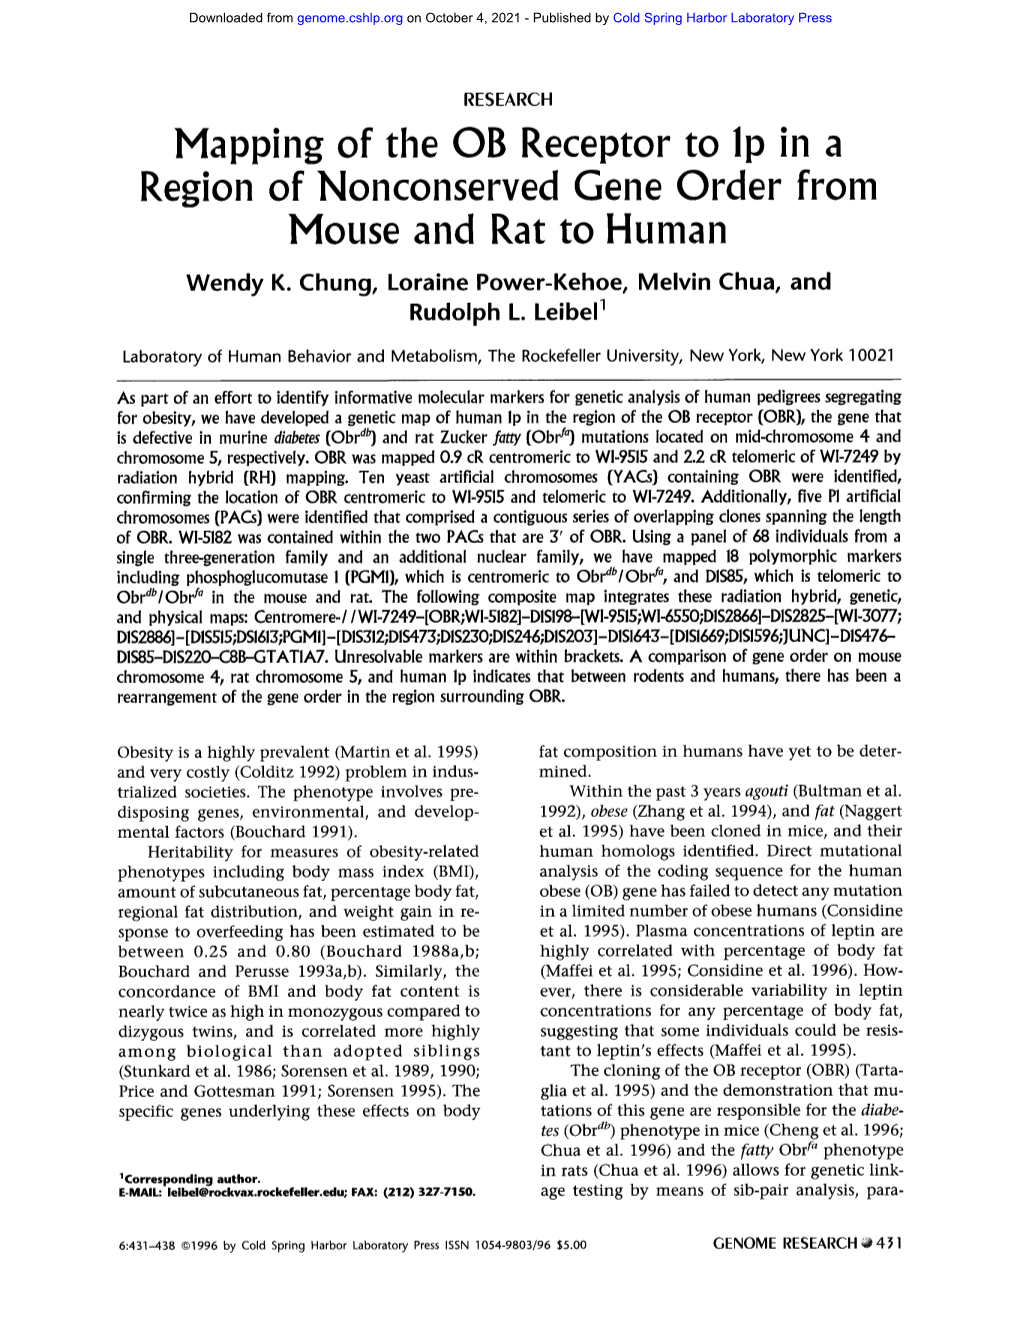 Mapping of the OB Receptor to Lp in a Region of Nonconserved Gene Order from Mouse and Rat to Human Wendy K